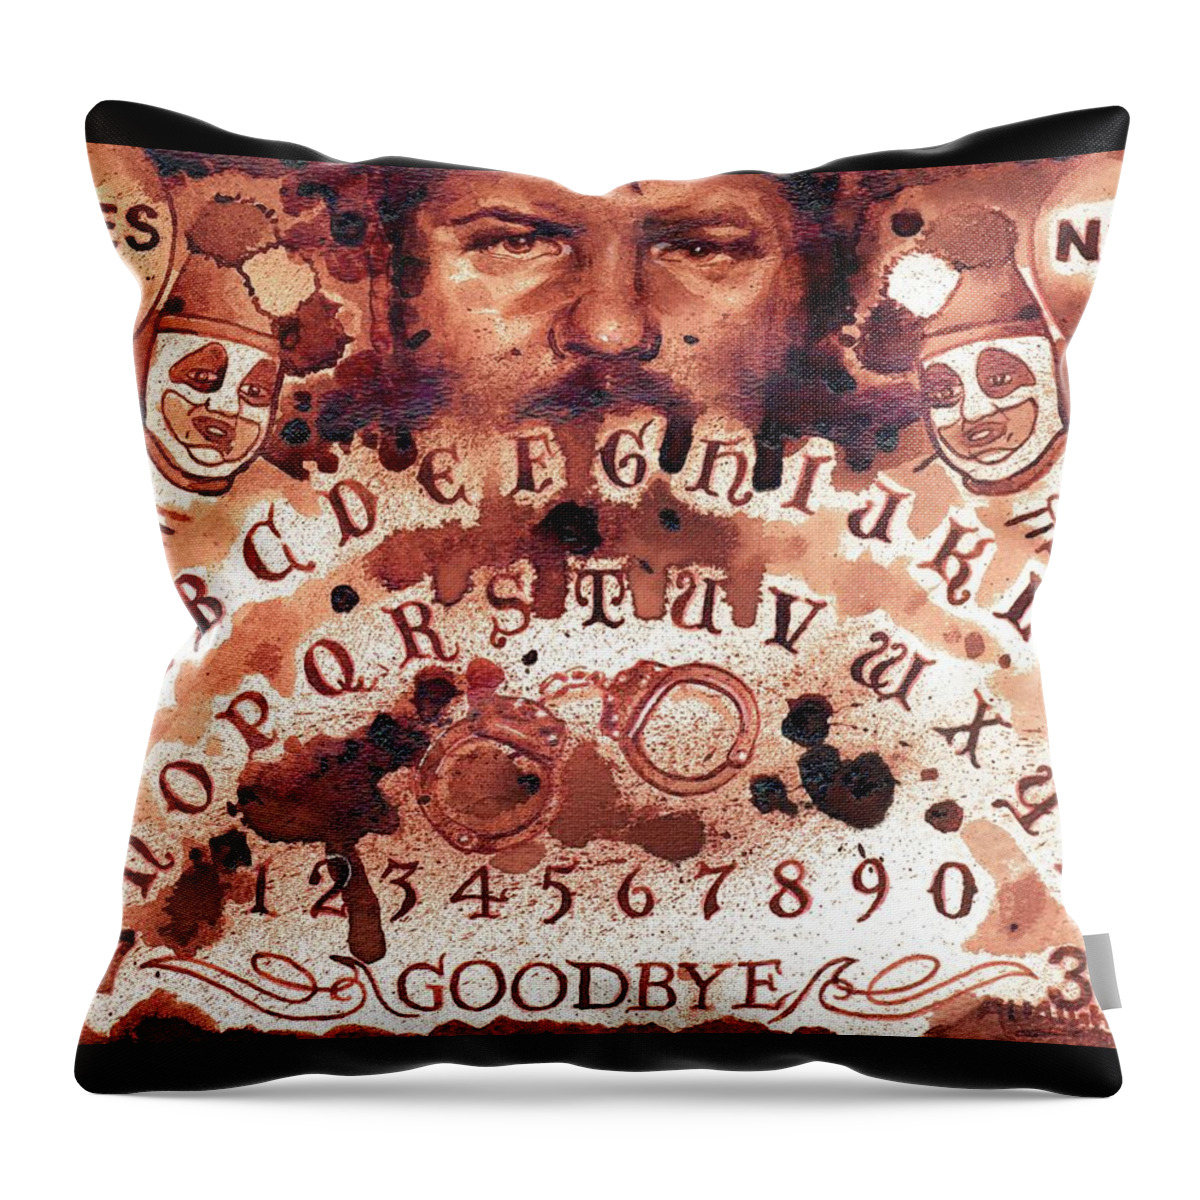 John Wayne Gacy Throw Pillow featuring the painting Gacy Themed Spirit Board by Ryan Almighty